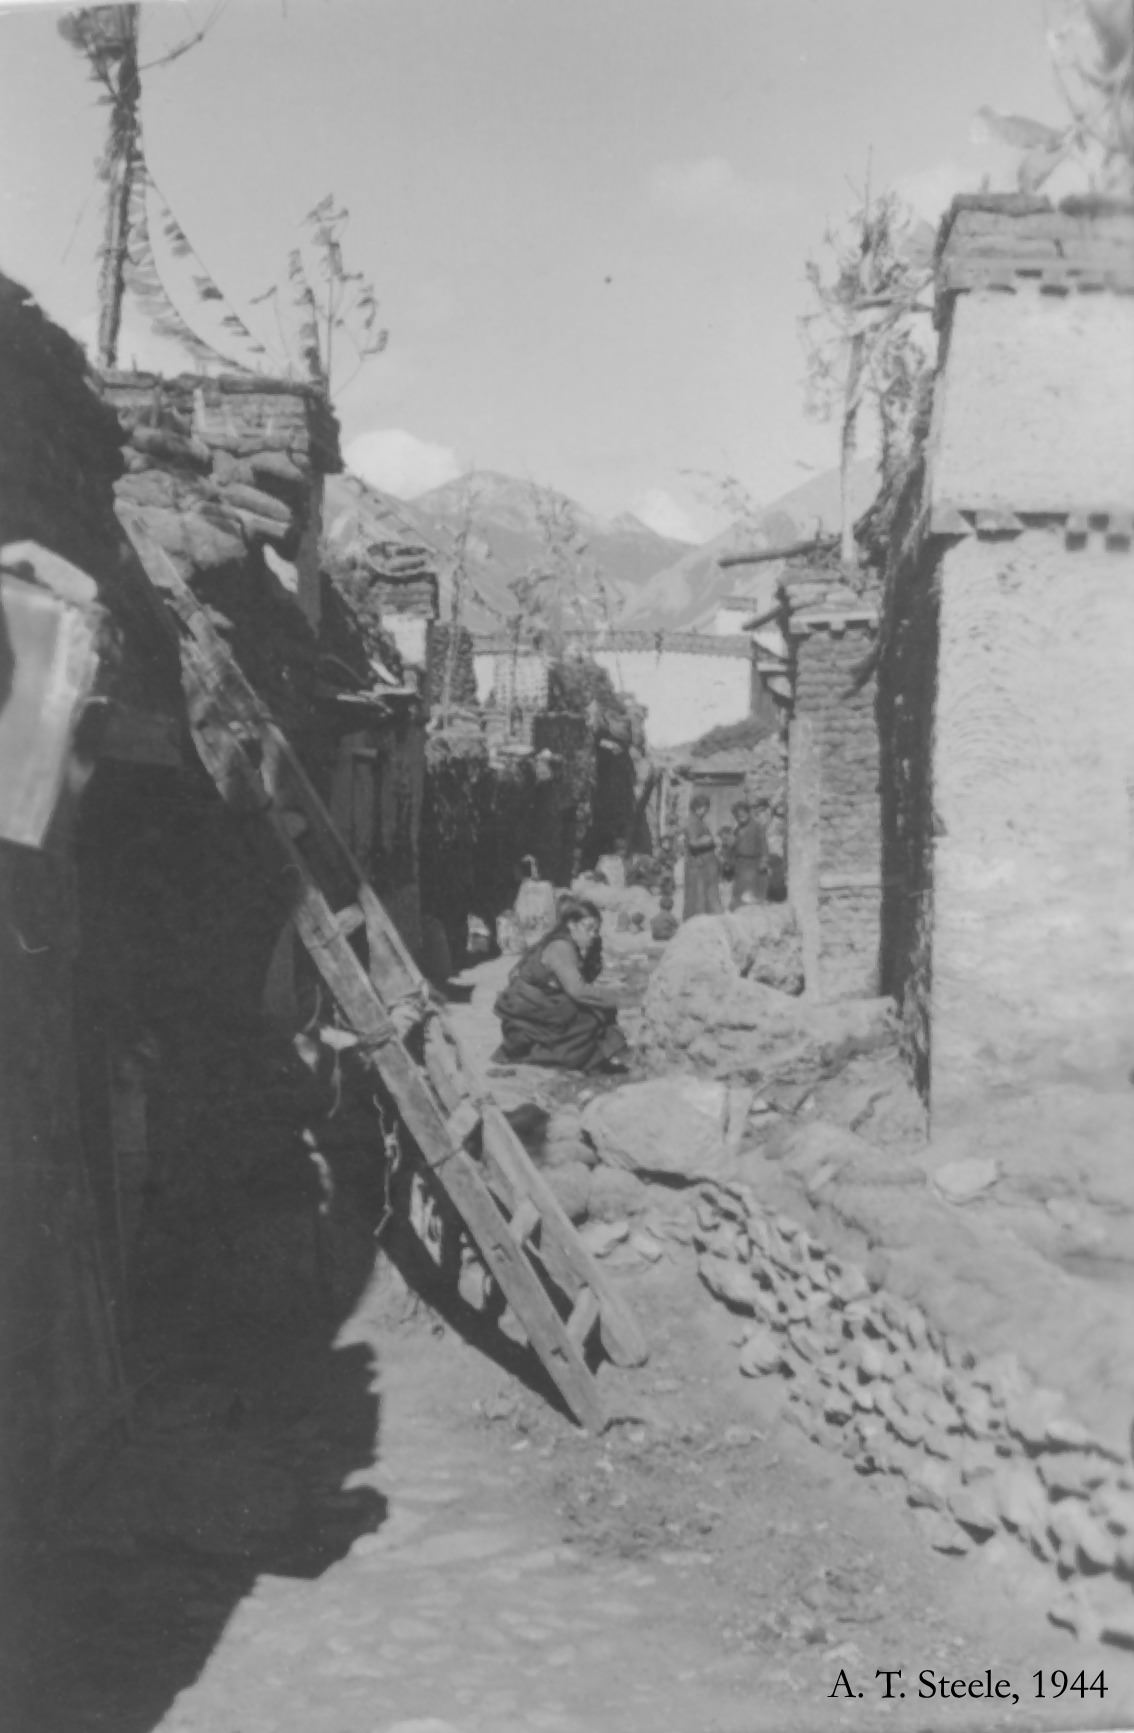 A Street in Phari, Tibet, 1944. A street in Phari, Tibet, sometimes called the "highest, windiest, dirtiest city in the world".